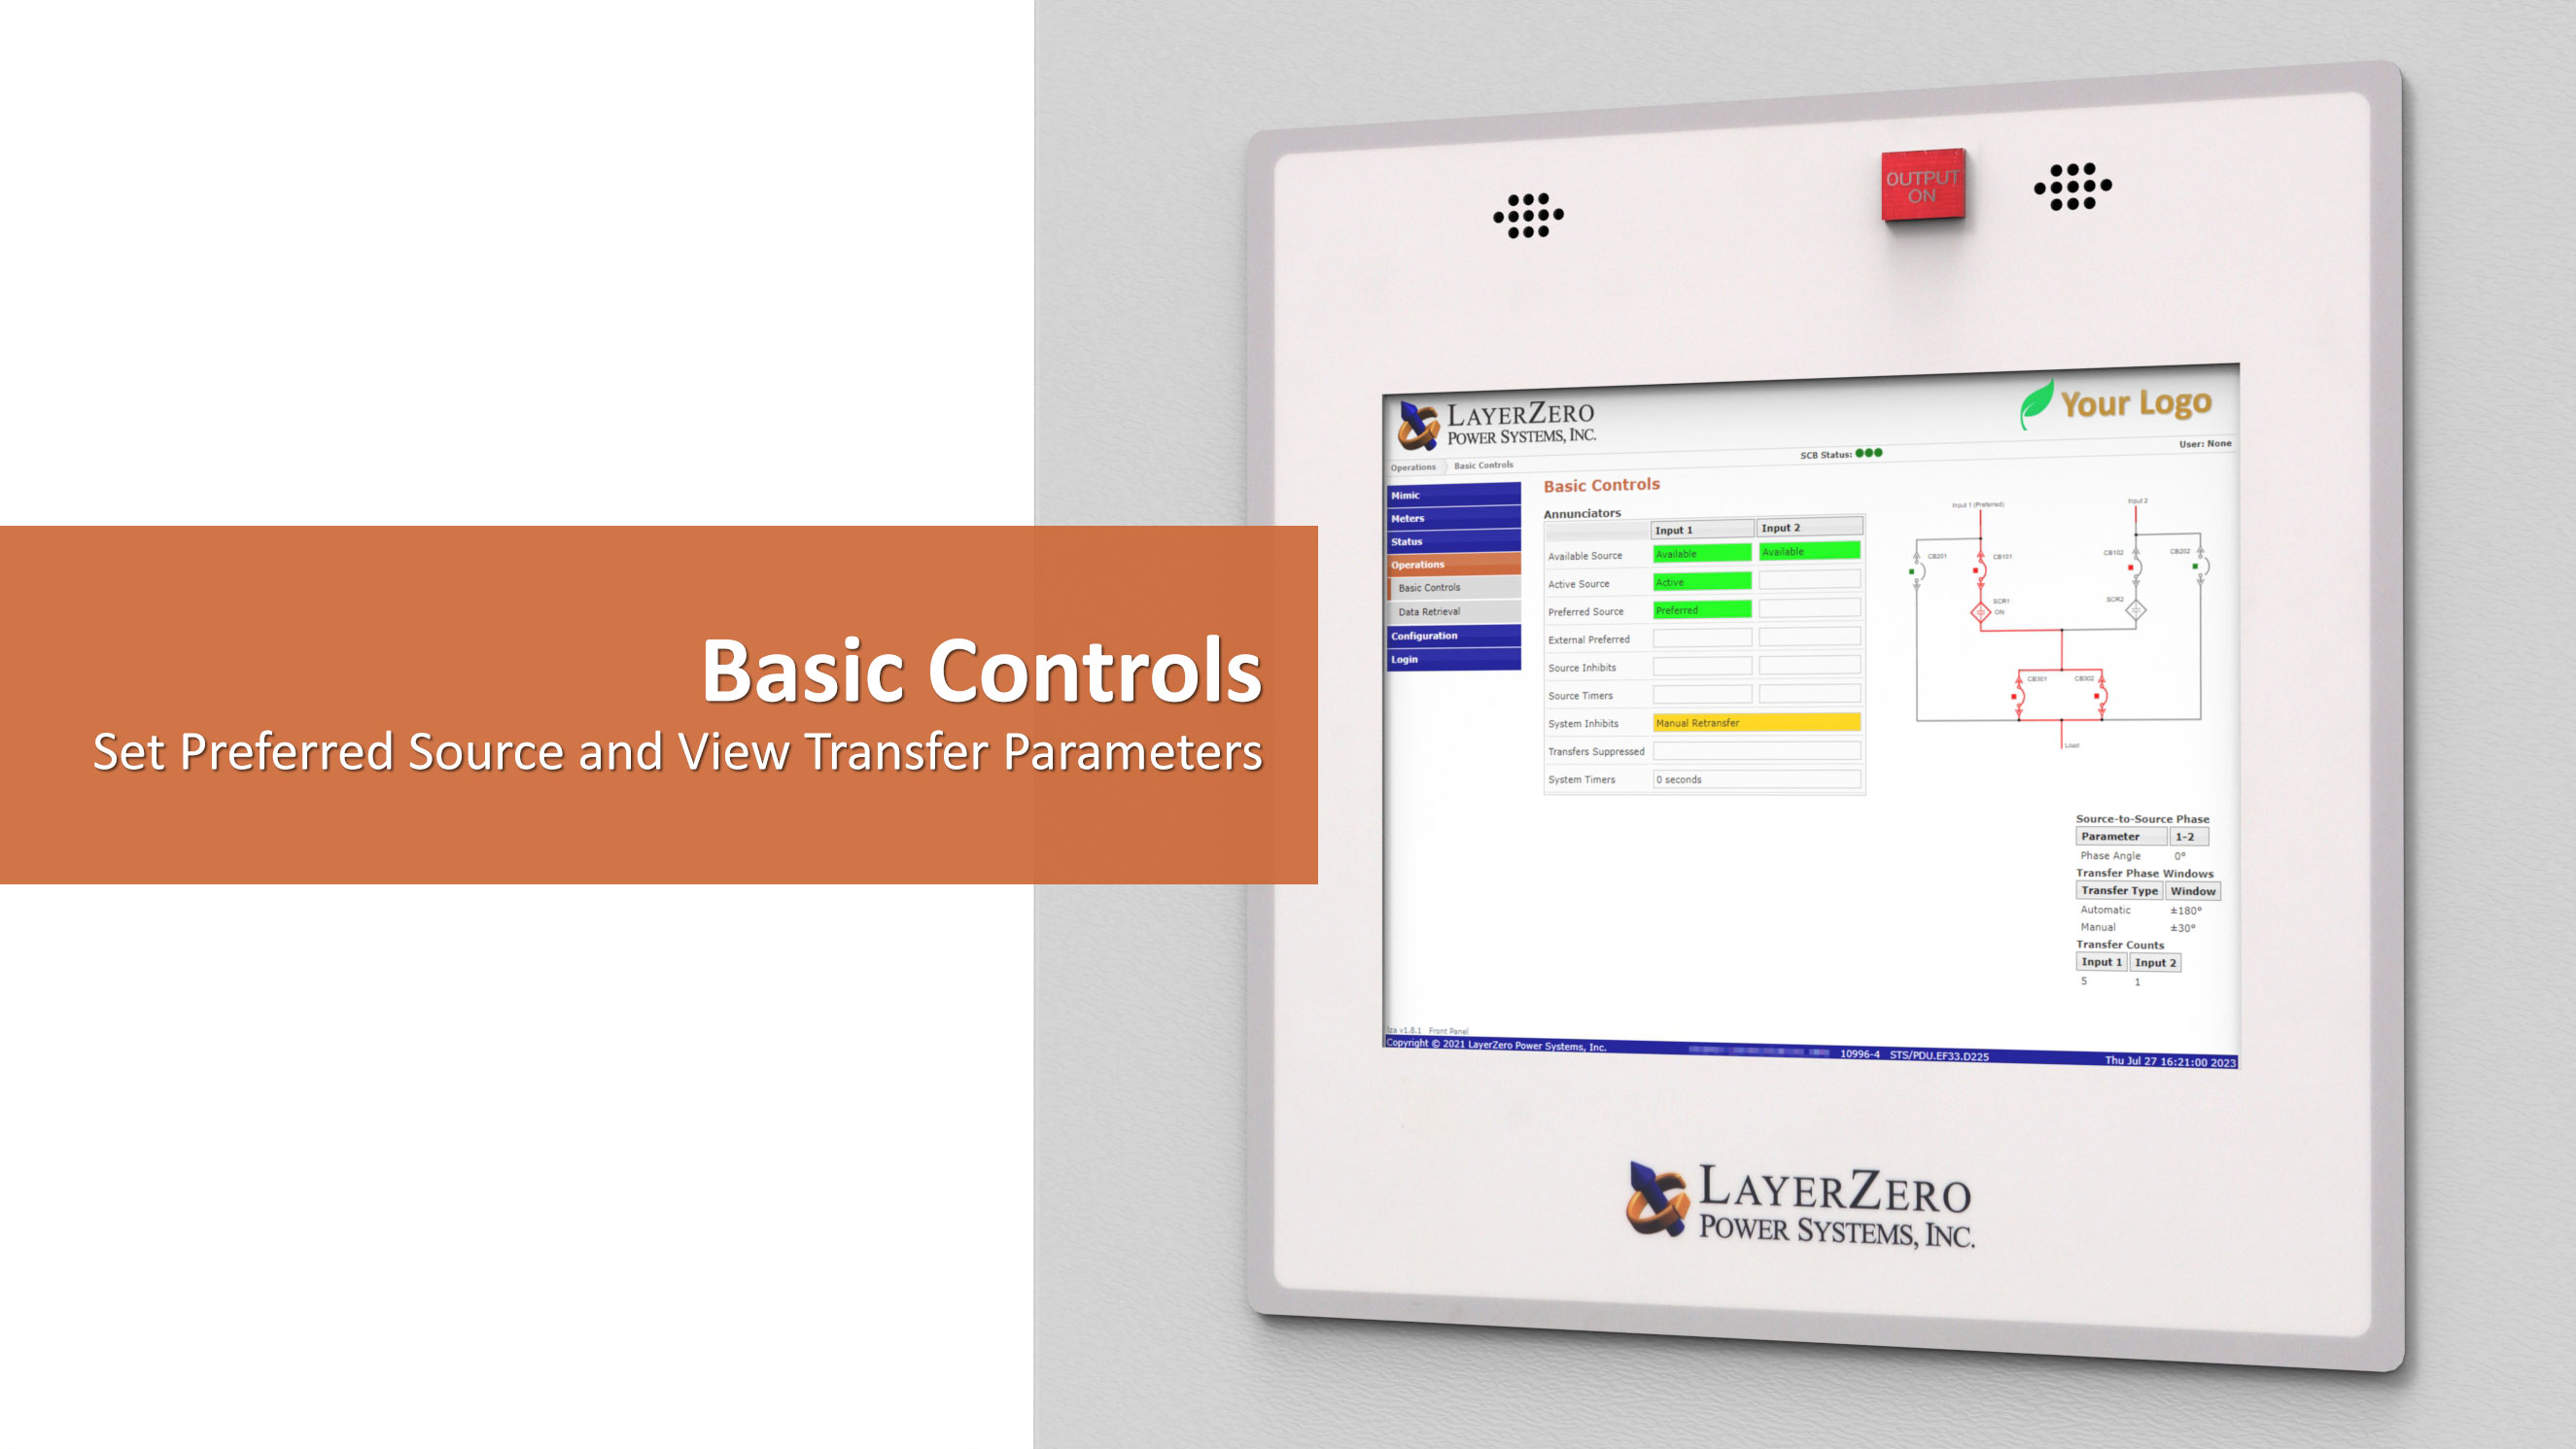 Basic Controls in the LayerZero eSTS Static Transfer Switch